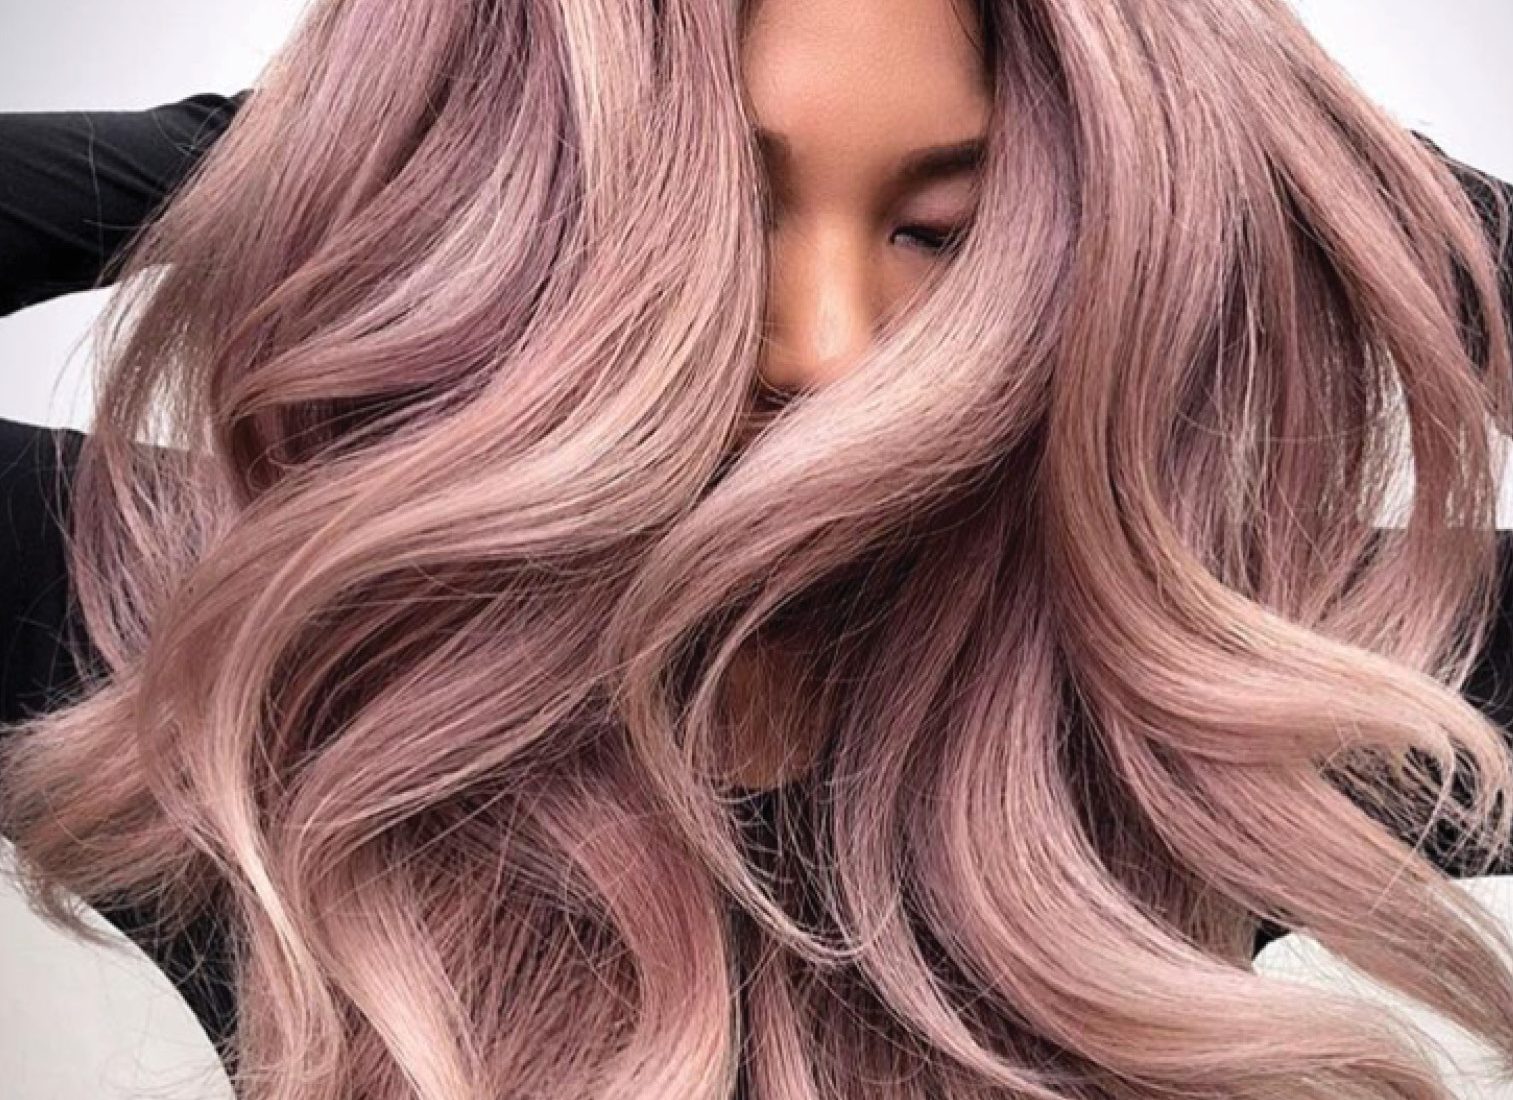 Top Hair Colors For Spring 2019